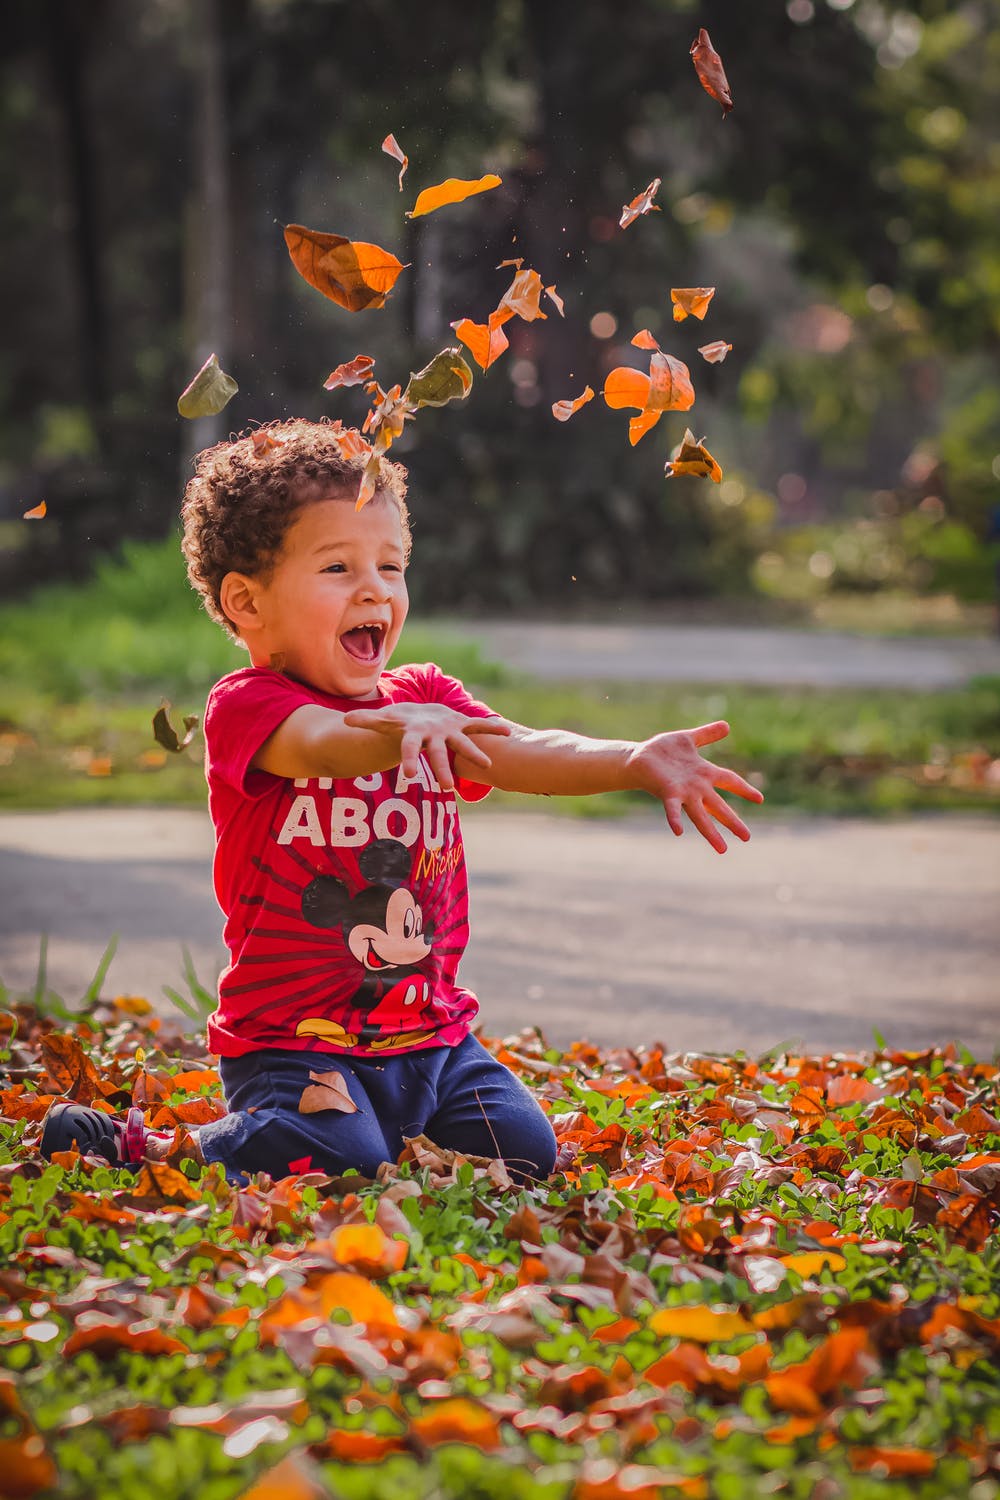 Gail's little boy was playing in the park when he was stolen from her | Source: Pexels